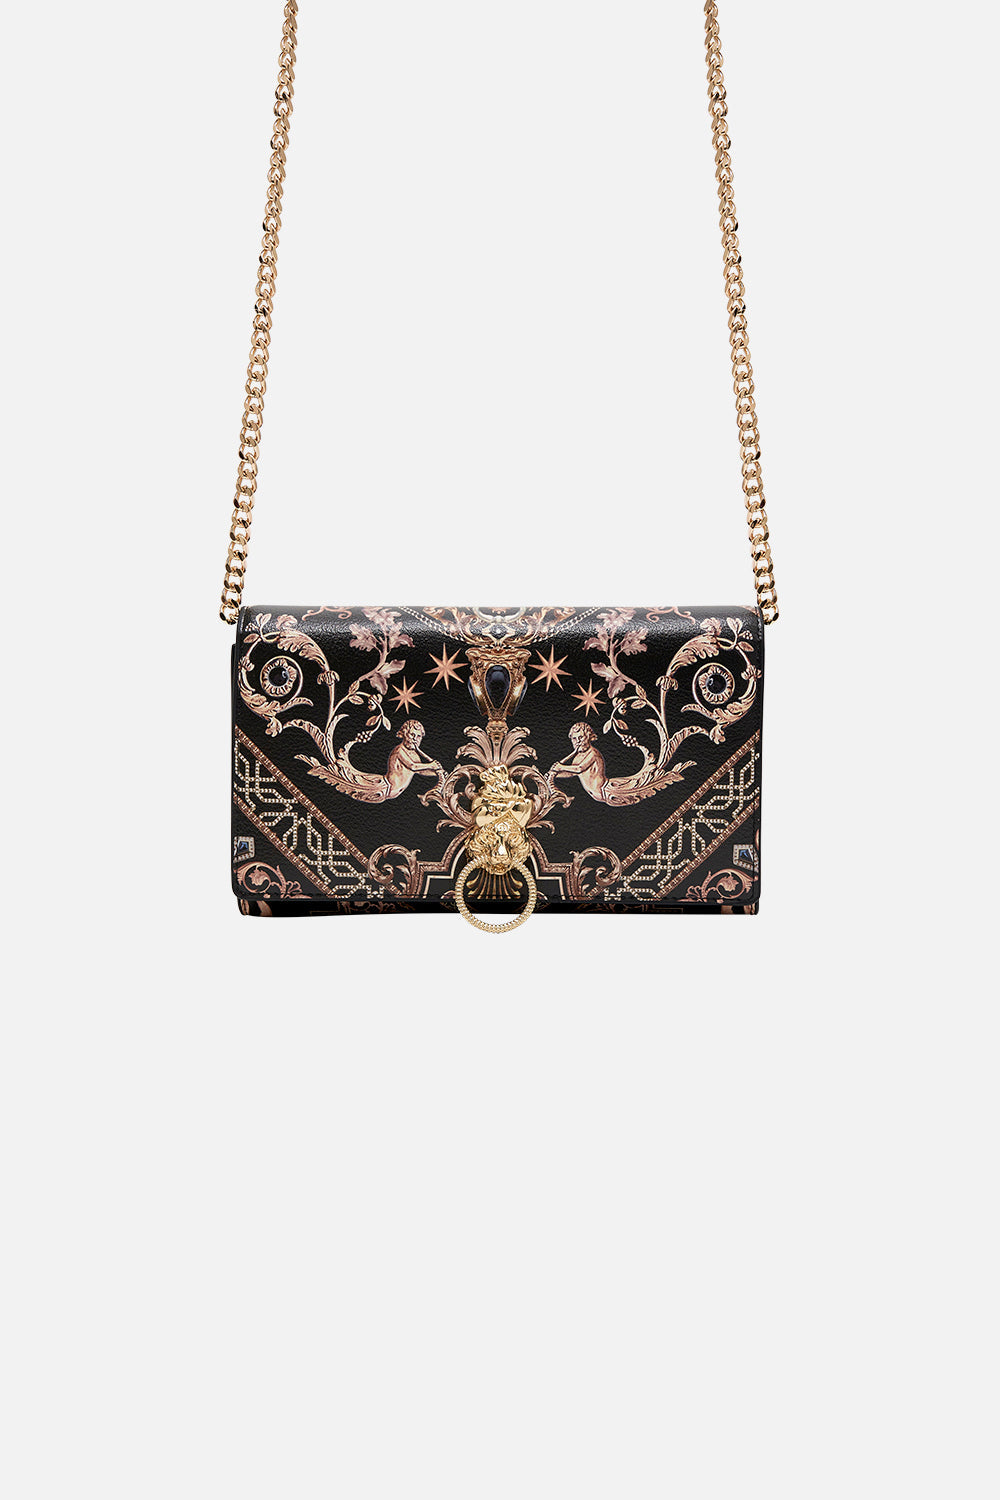 Product view of CAMILLA chain strap crossbody bag in Duomo Dynasty 